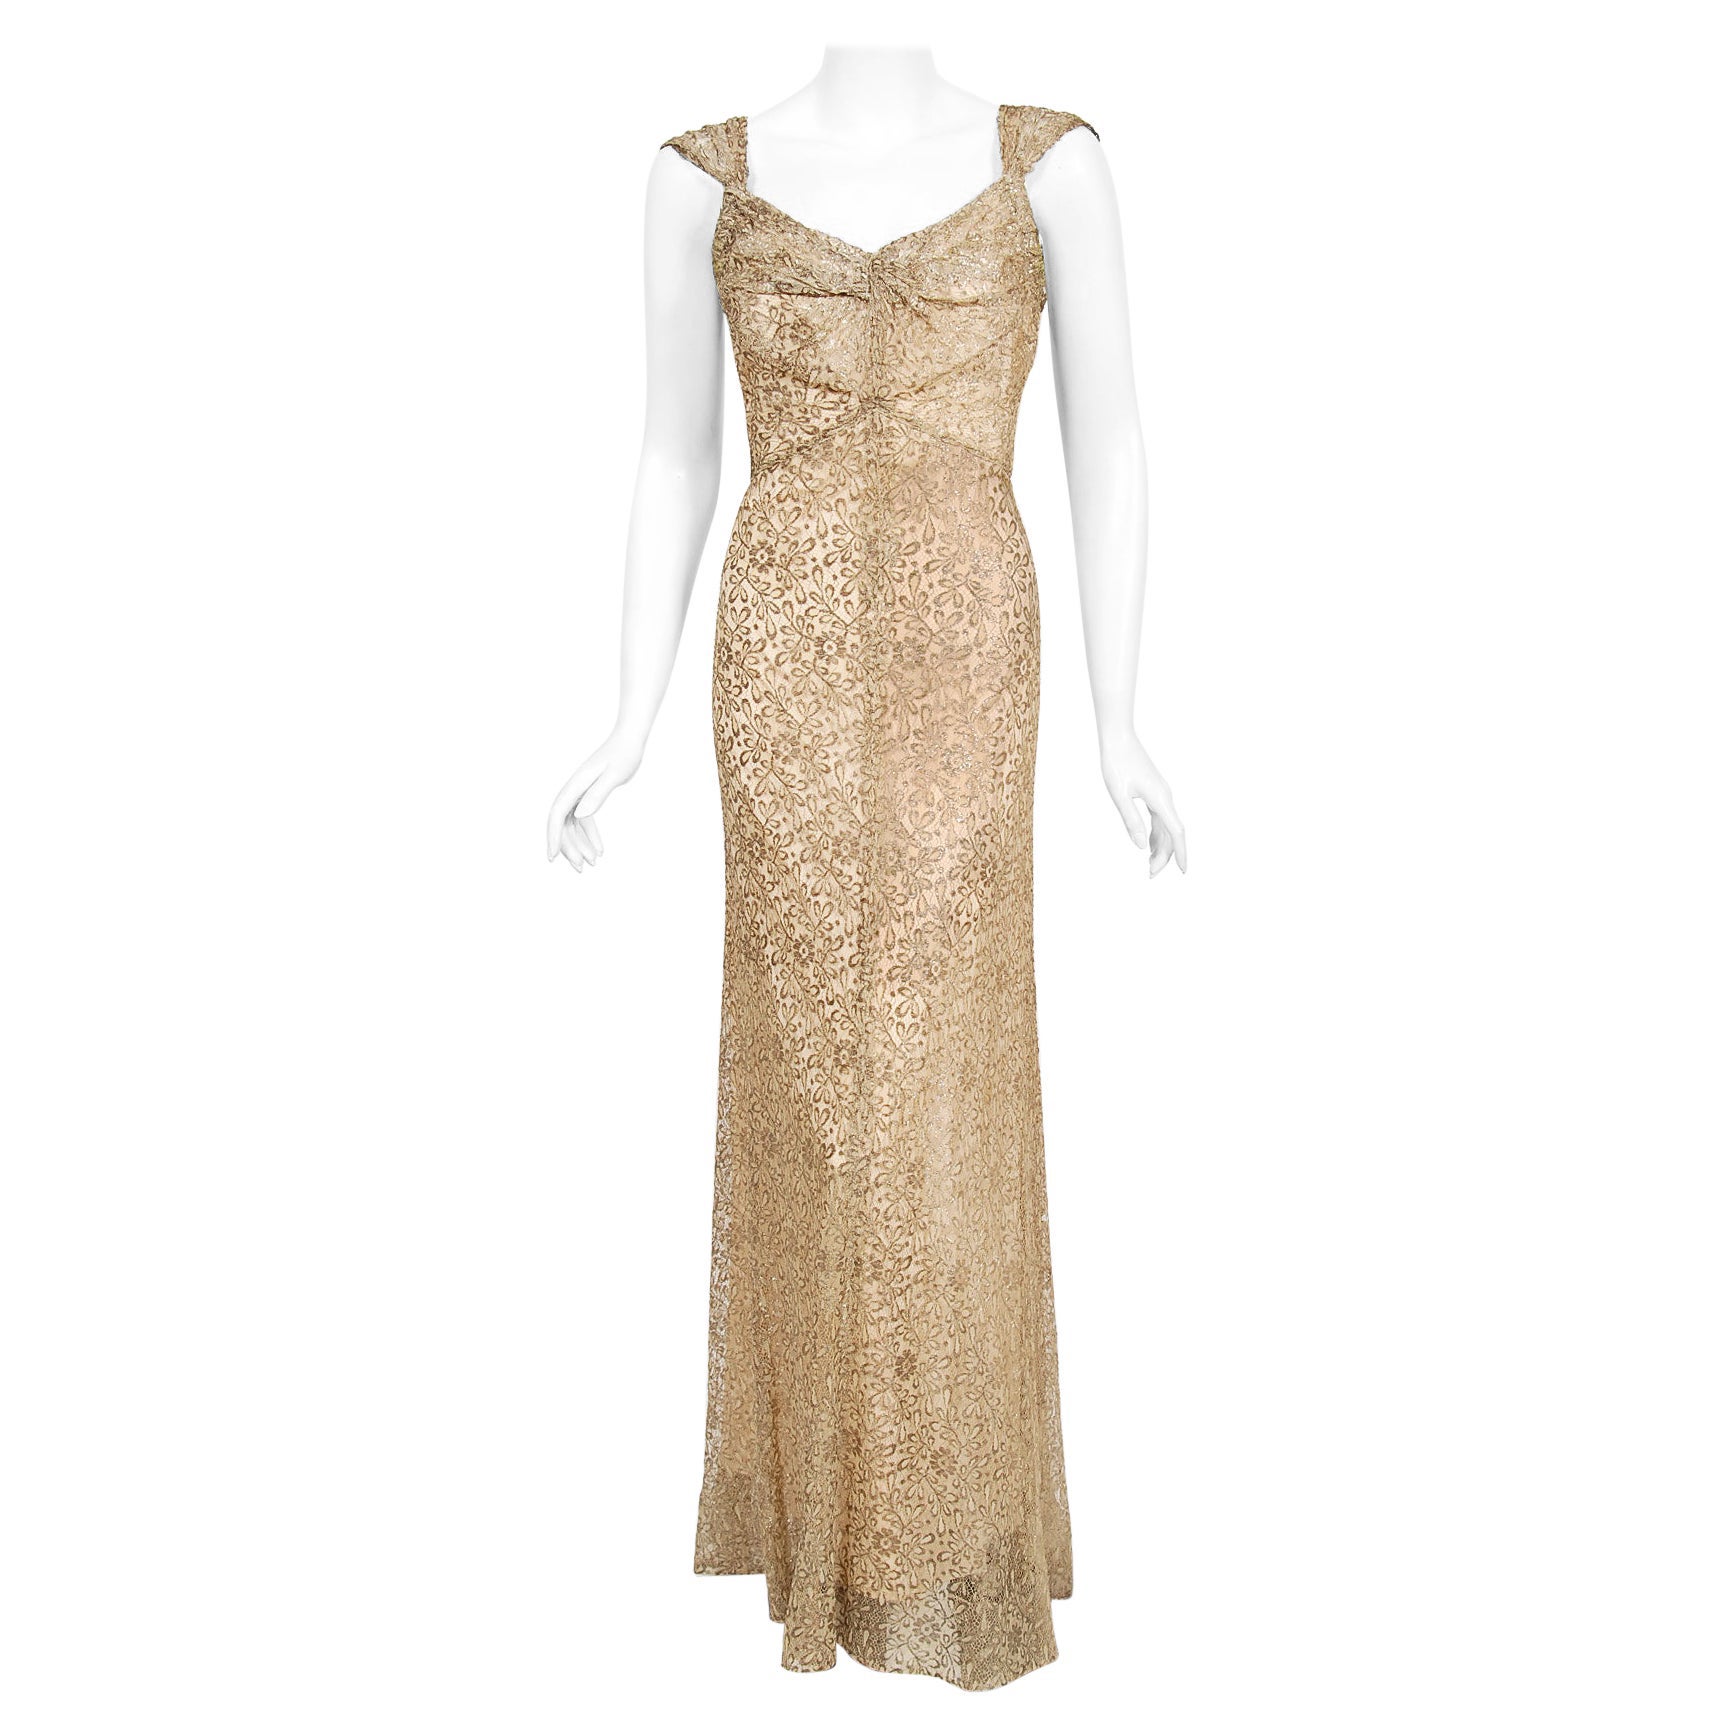 Vintage 1930's Metallic Gold Lamé Lace Nude Illusion Bias-Cut Old Hollywood Gown